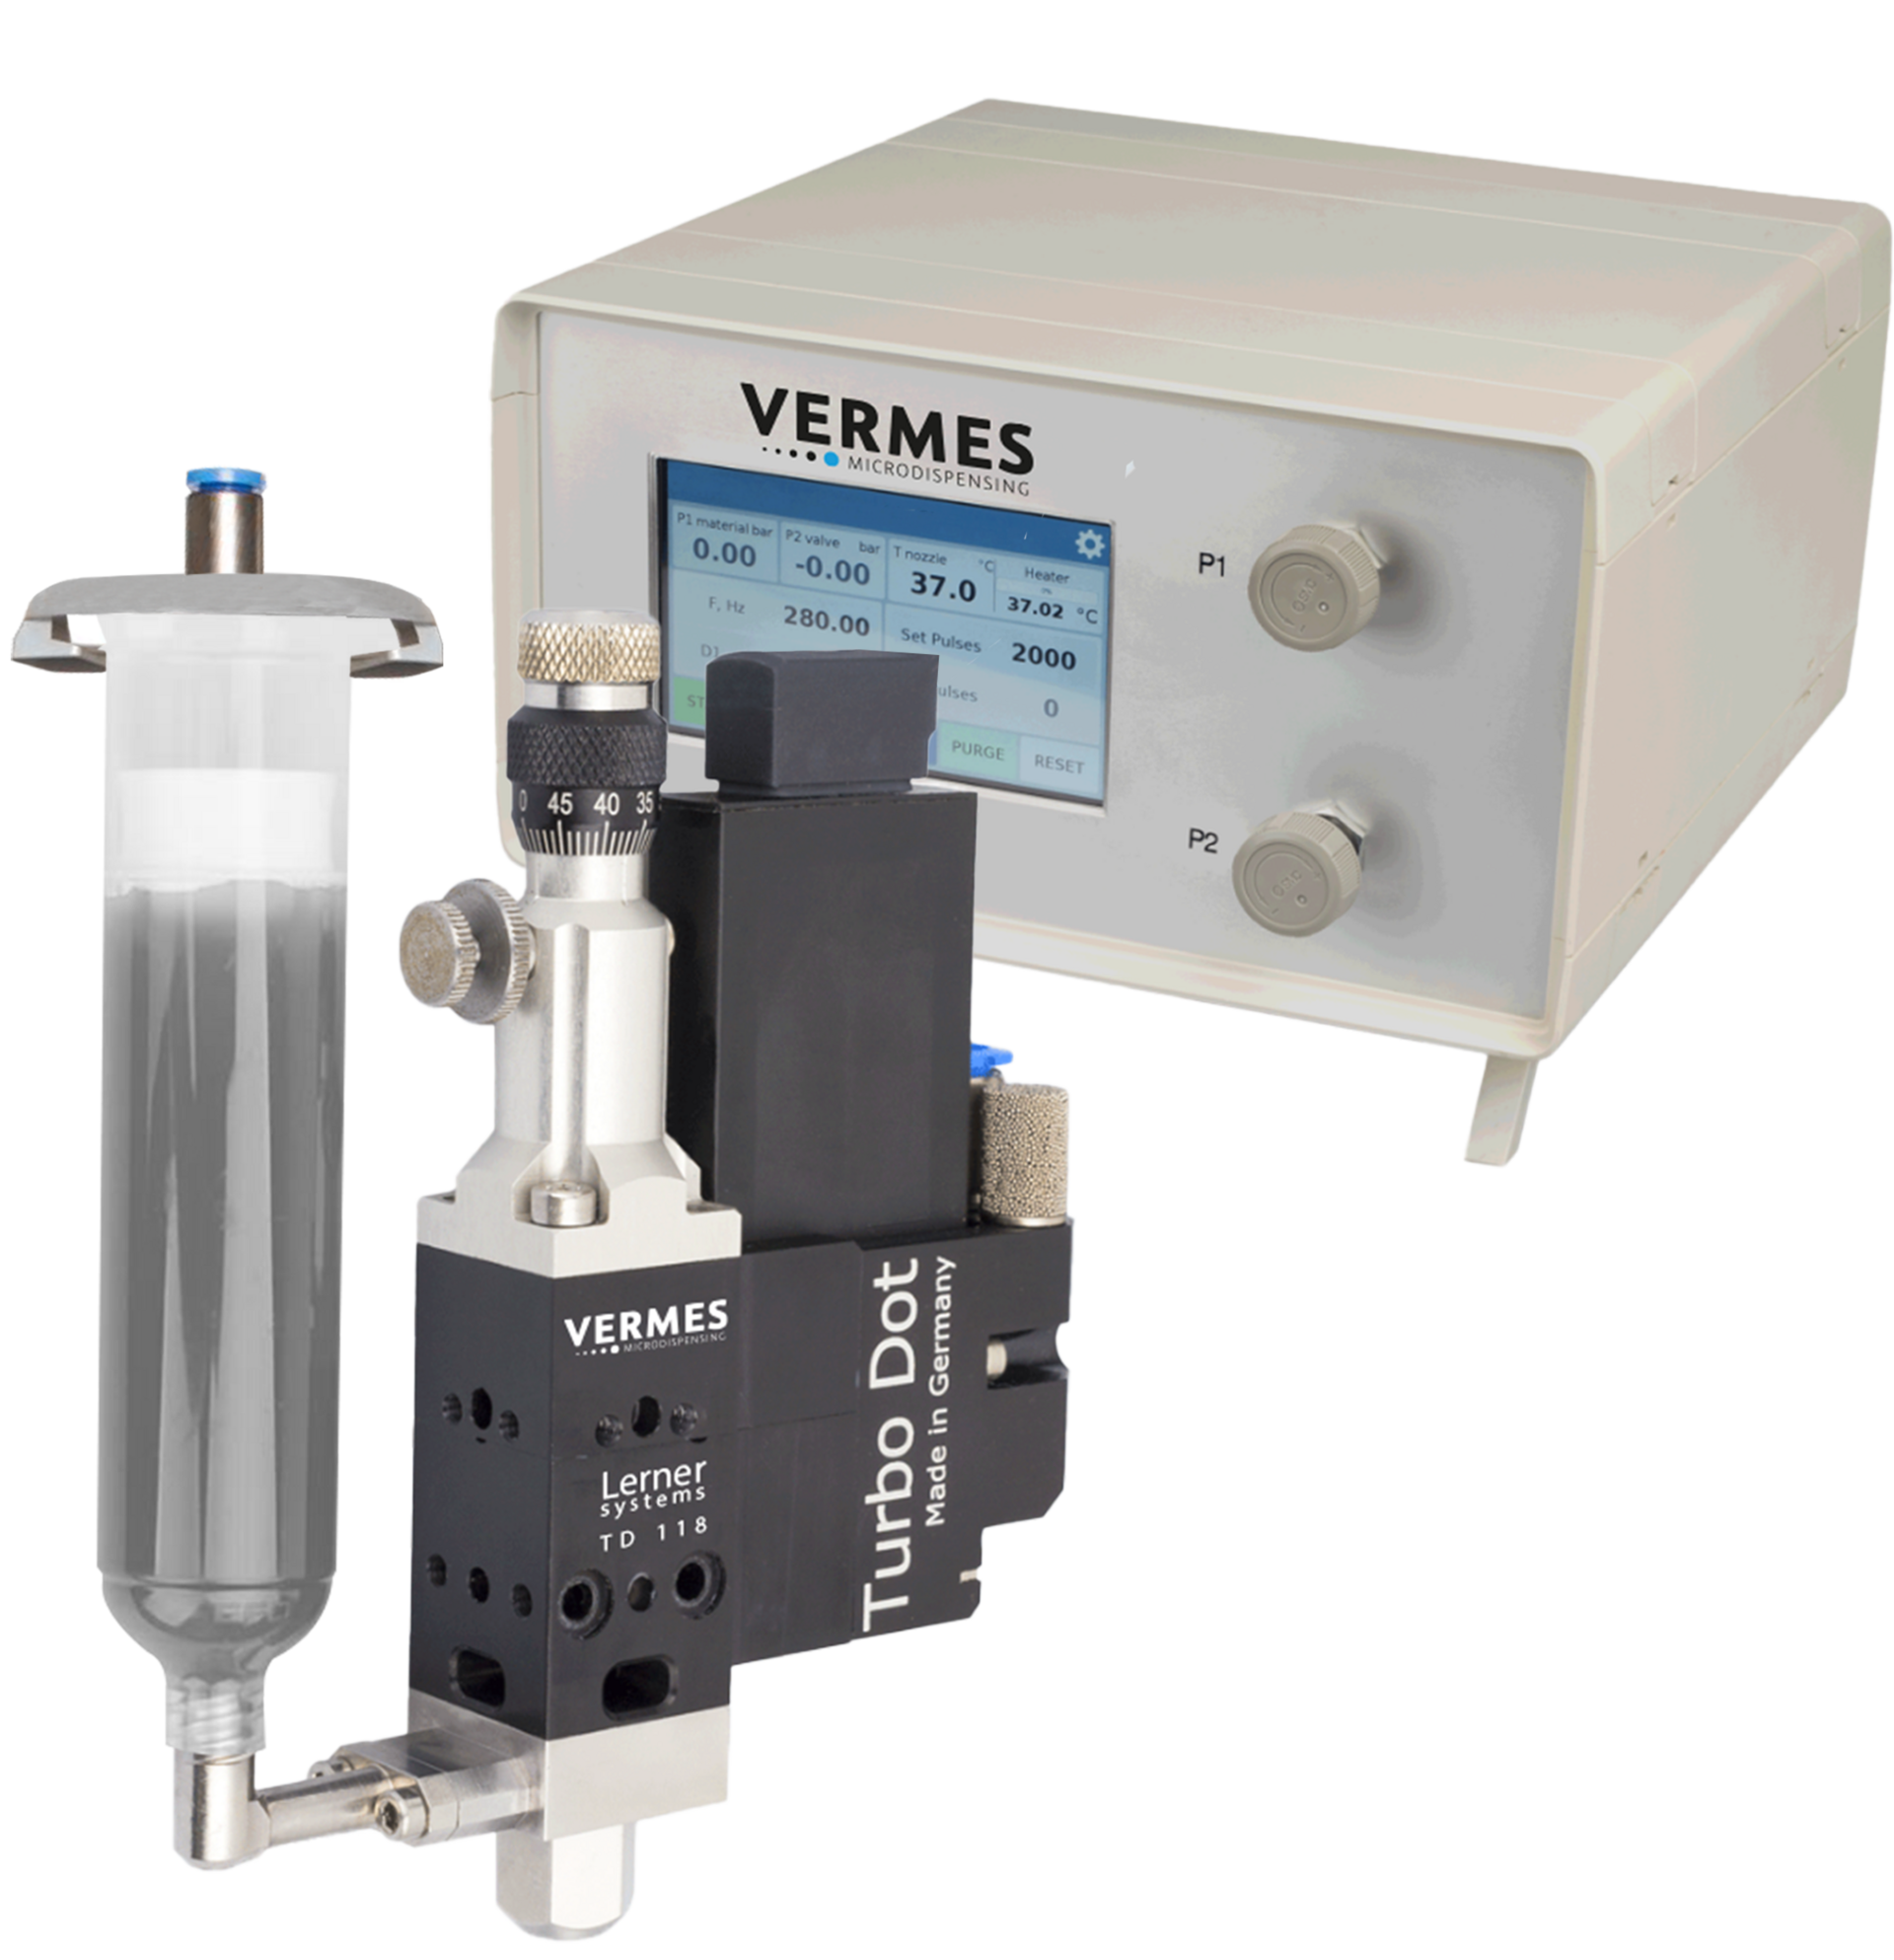 VERMES Microdispensing opens new office in Midwest, USA - VERMES